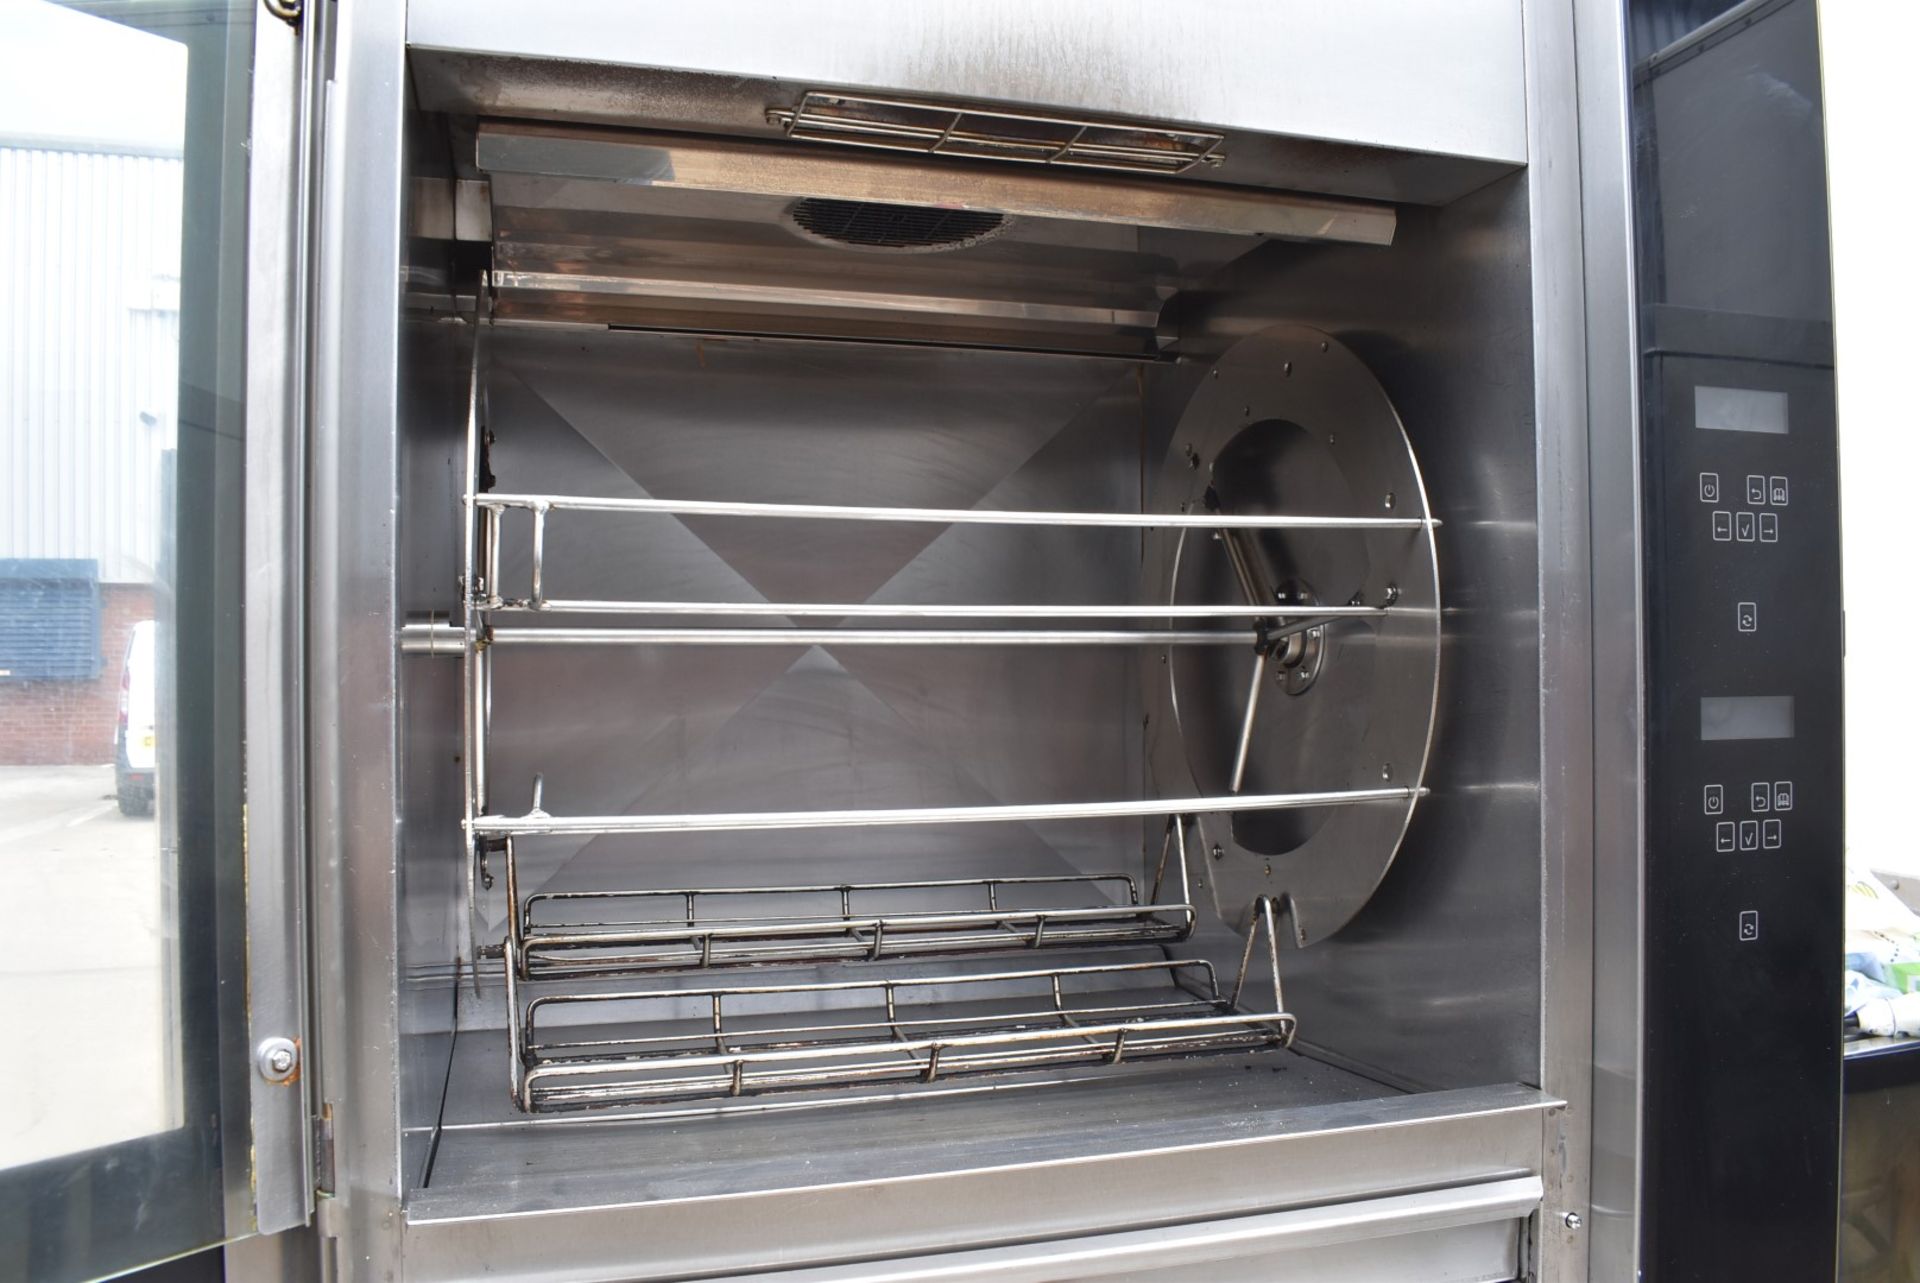 1 x Frijado 80 Chicken Rotisserie Programmable Double Oven - 3 Phase - Model: TDR 8+8P - RRP £21,000 - Image 2 of 17